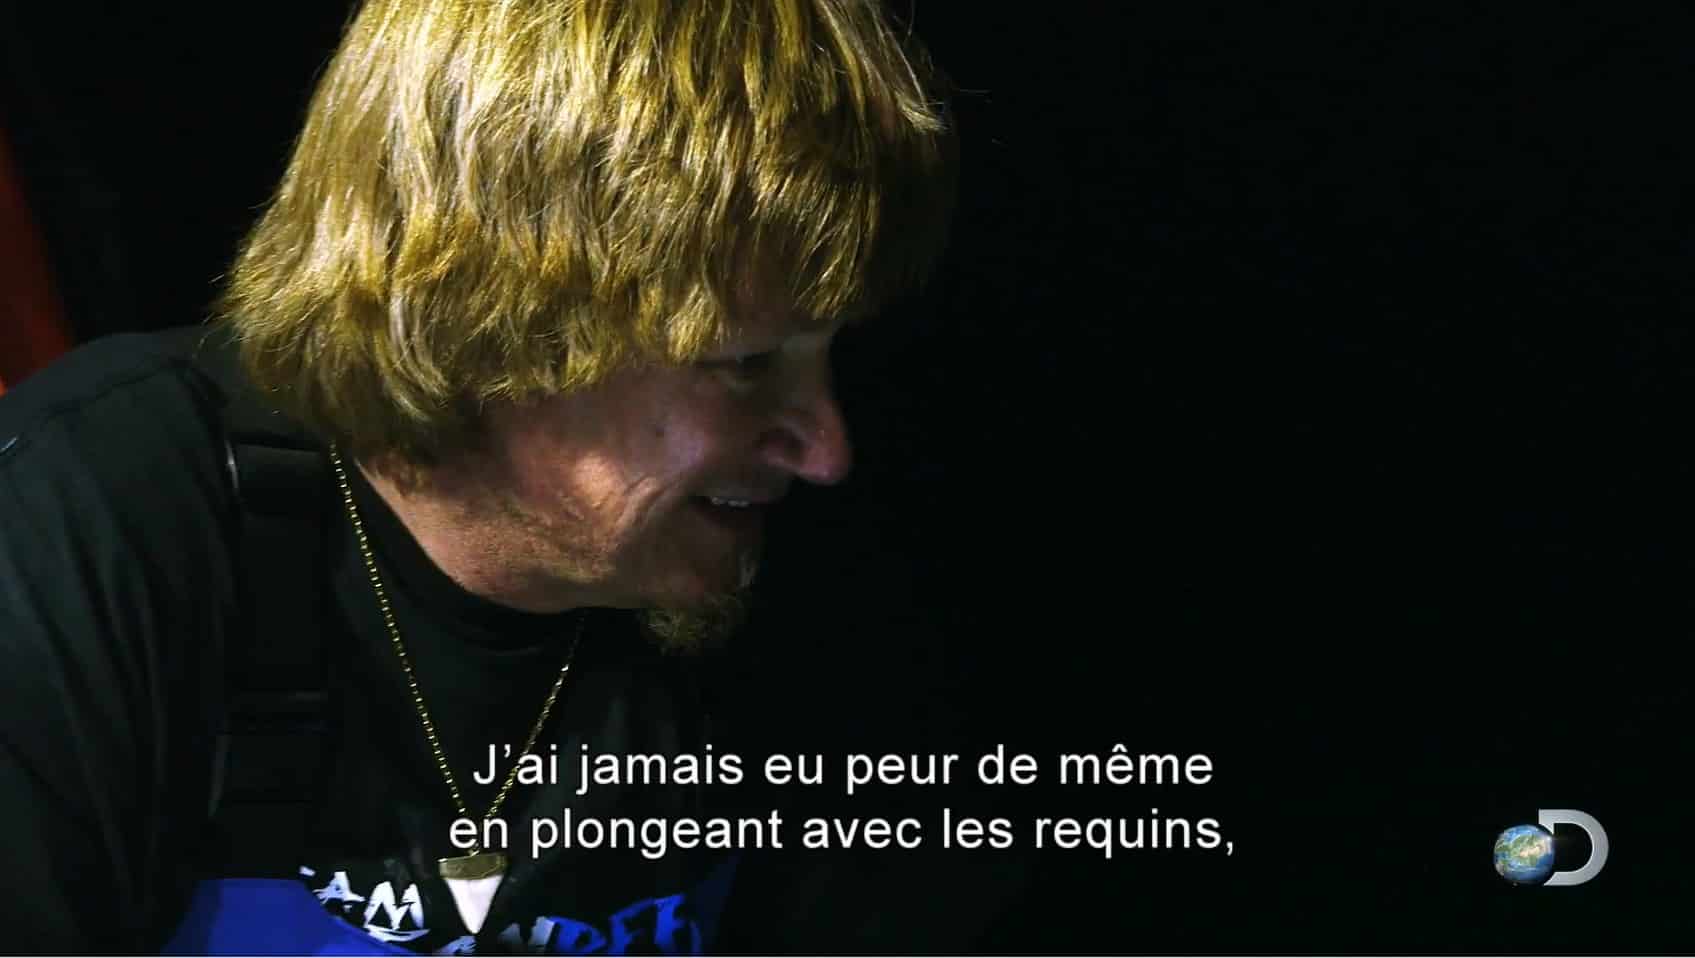 Clip of diver speaking to a colleague with French subtitles